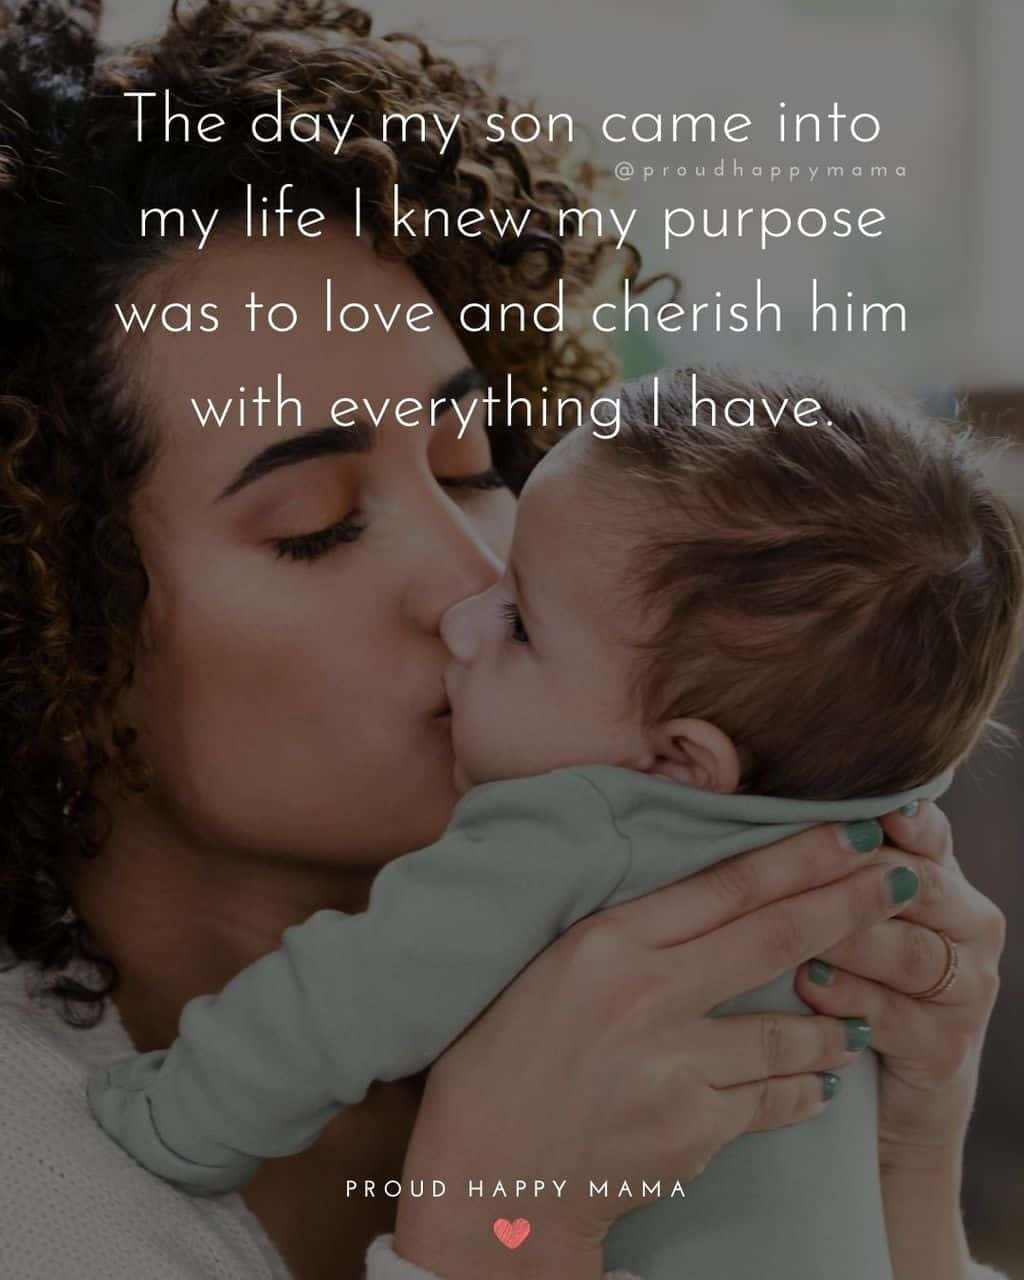 Son Quotes - The day my son came into my life I knew my purpose was to love and cherish him with everything I have.’